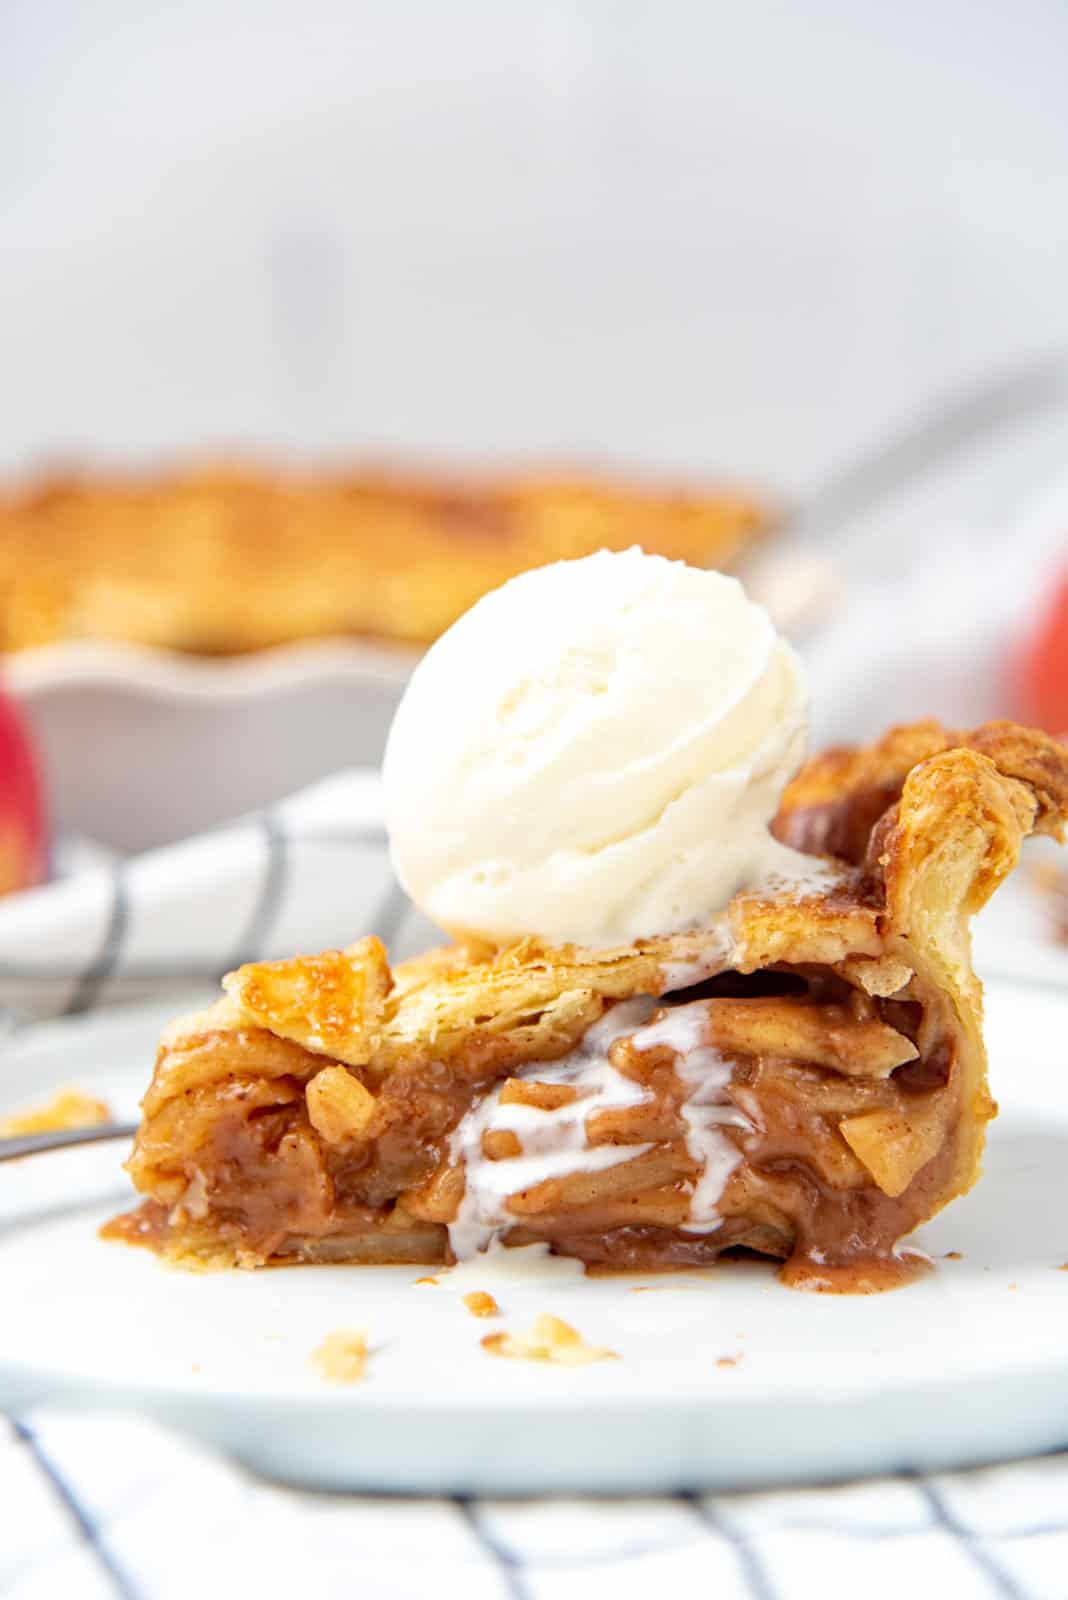 A side on view of a slice of pie with apple filling and a scoop of ice cream on top.